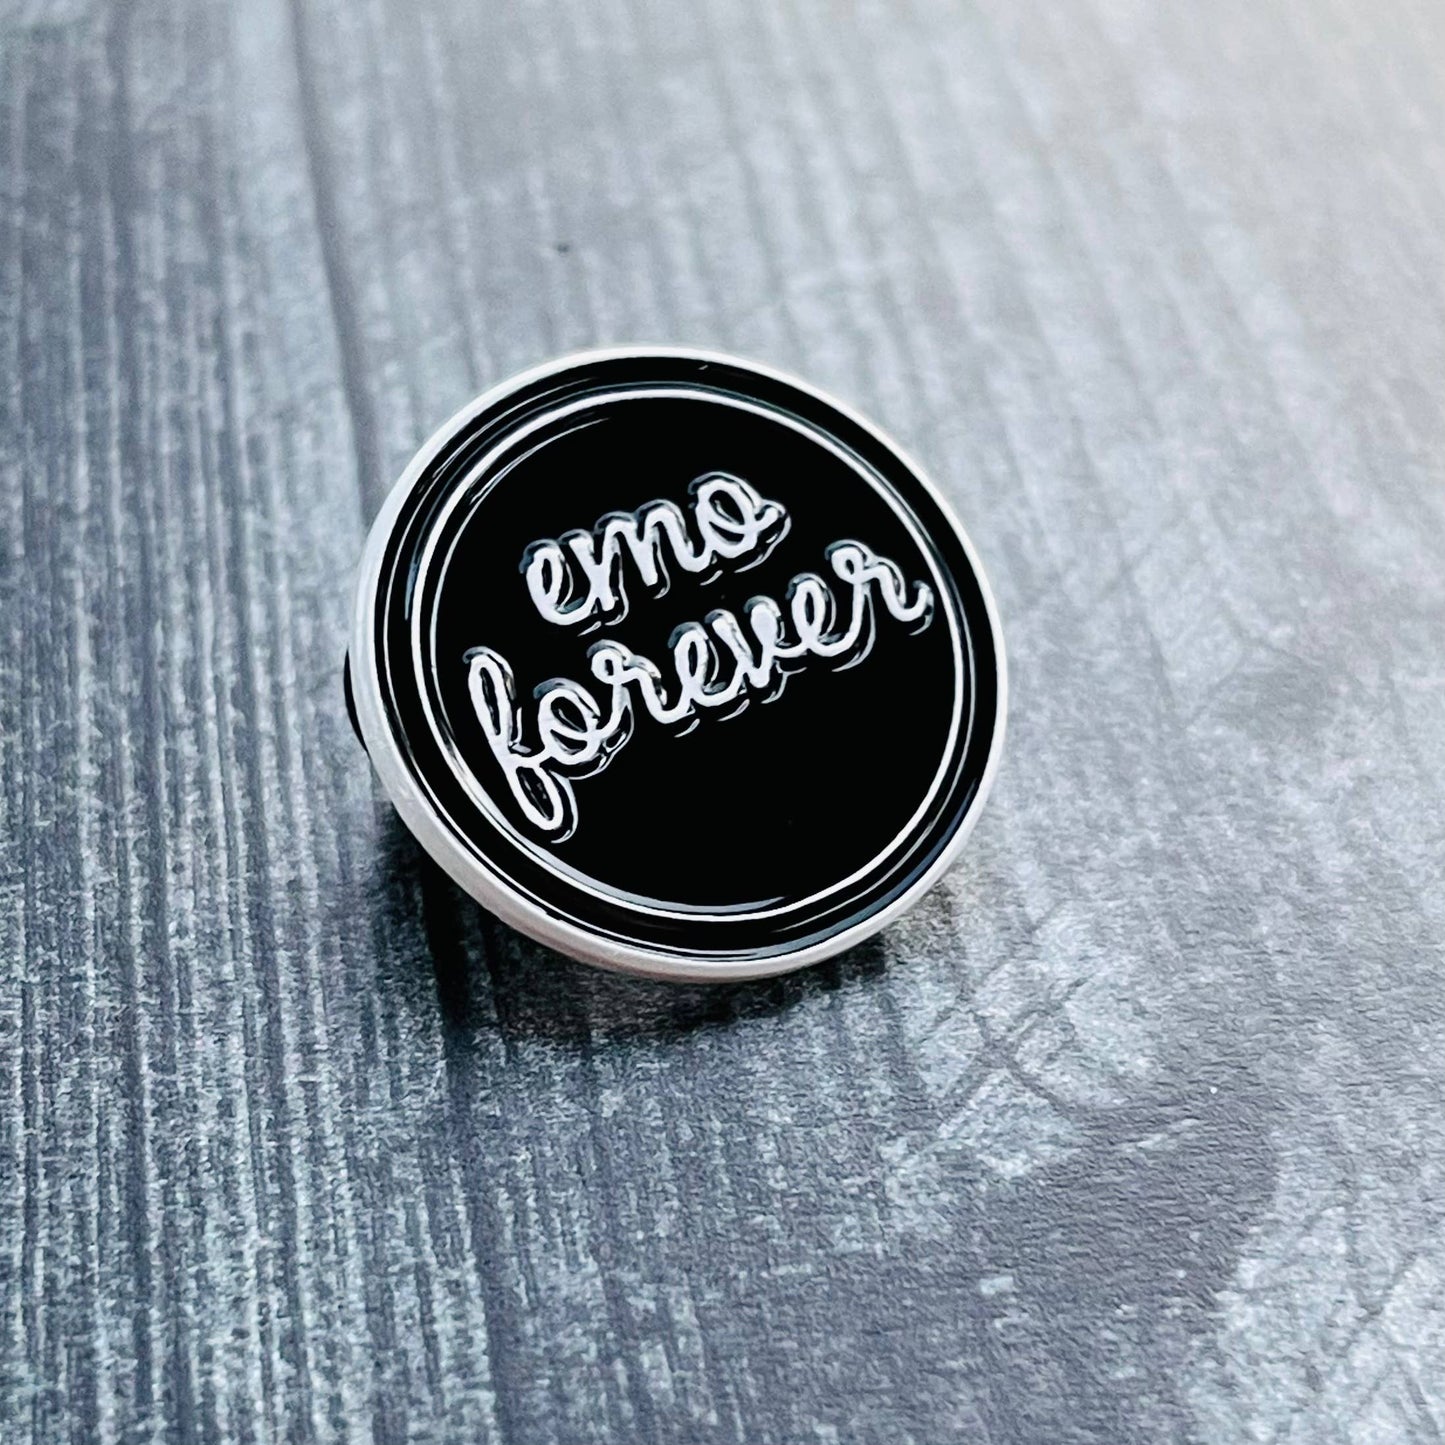 The Silver Spider - Emo forever enamel lapel pin 1”